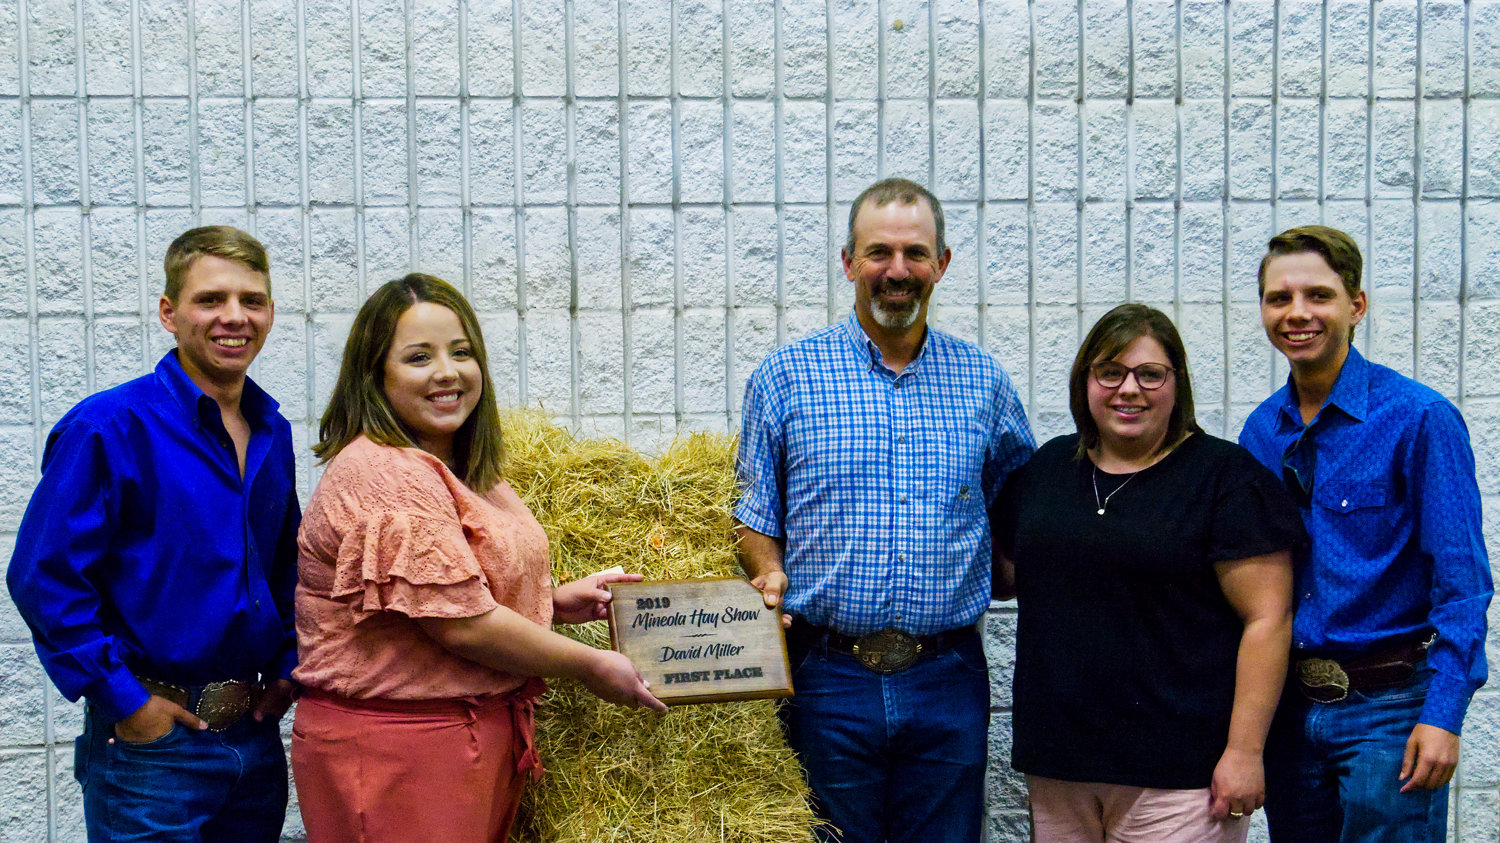 Mineola Packing Company was the winning bidder of $3,100 for the first place hay show entry of David Miller.